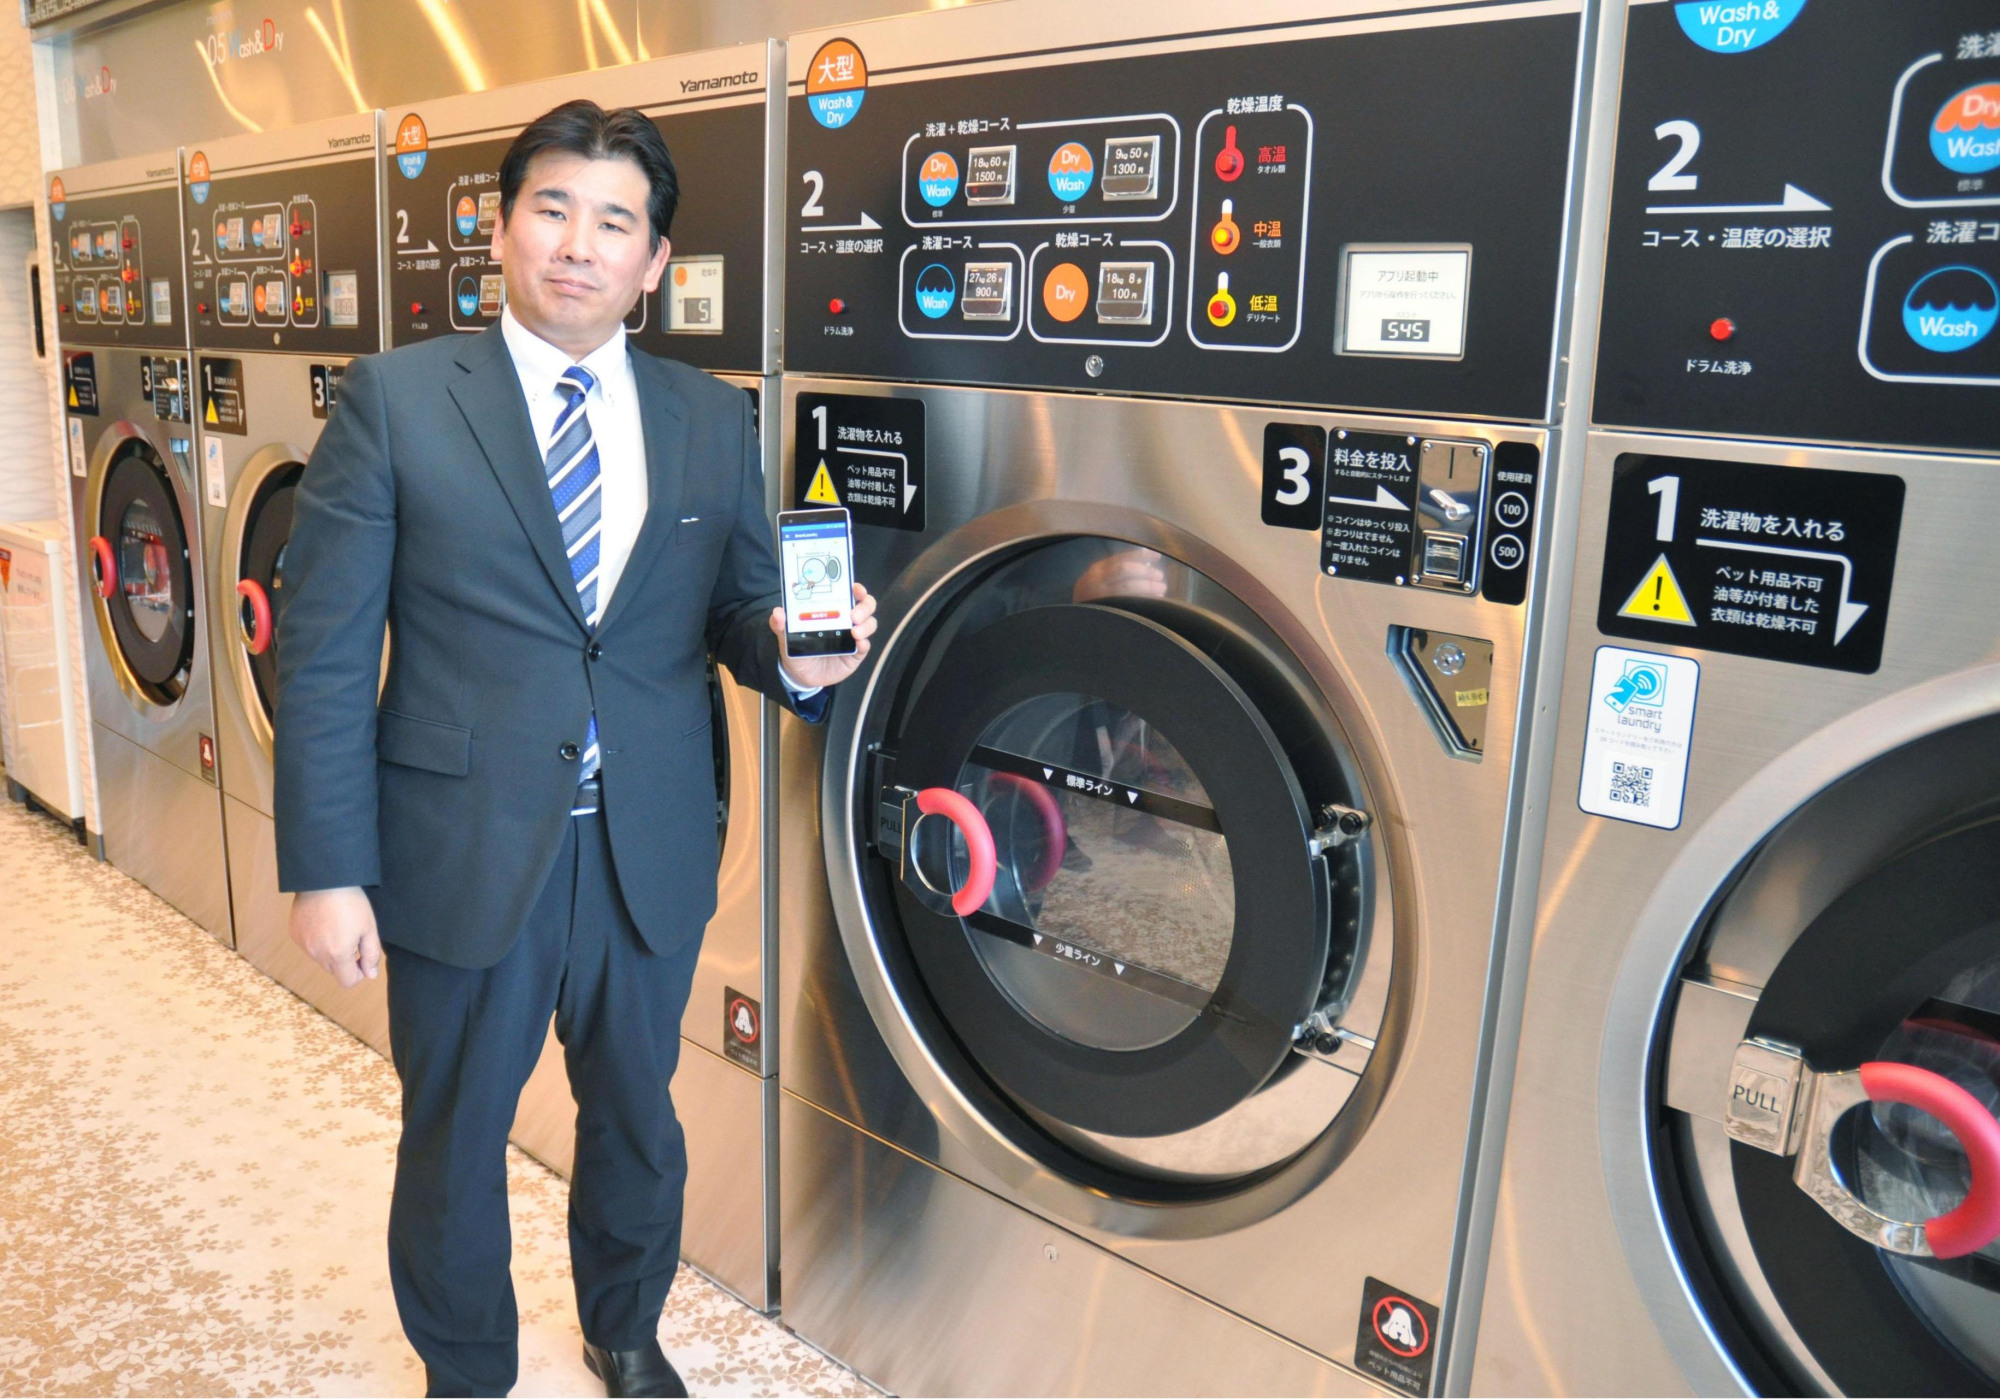 Wash Plus President Kentaro Takanashi poses with a smartphone at one of his laundromats in the city of Chiba. His company's smartphone service lets customers check whether washing machines are available, their clothes are ready or make payments. | KYODO